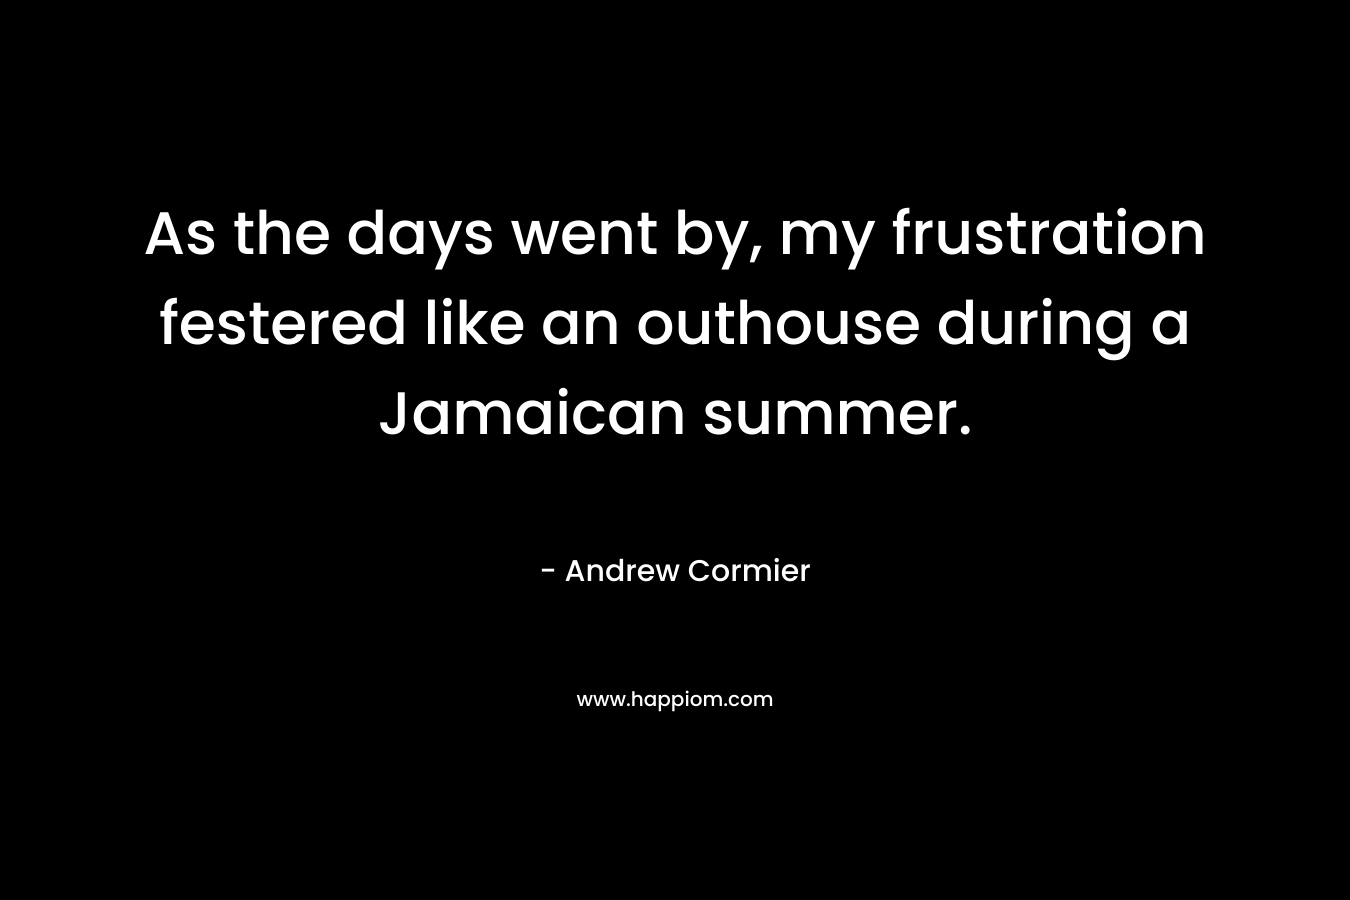 As the days went by, my frustration festered like an outhouse during a Jamaican summer. – Andrew Cormier